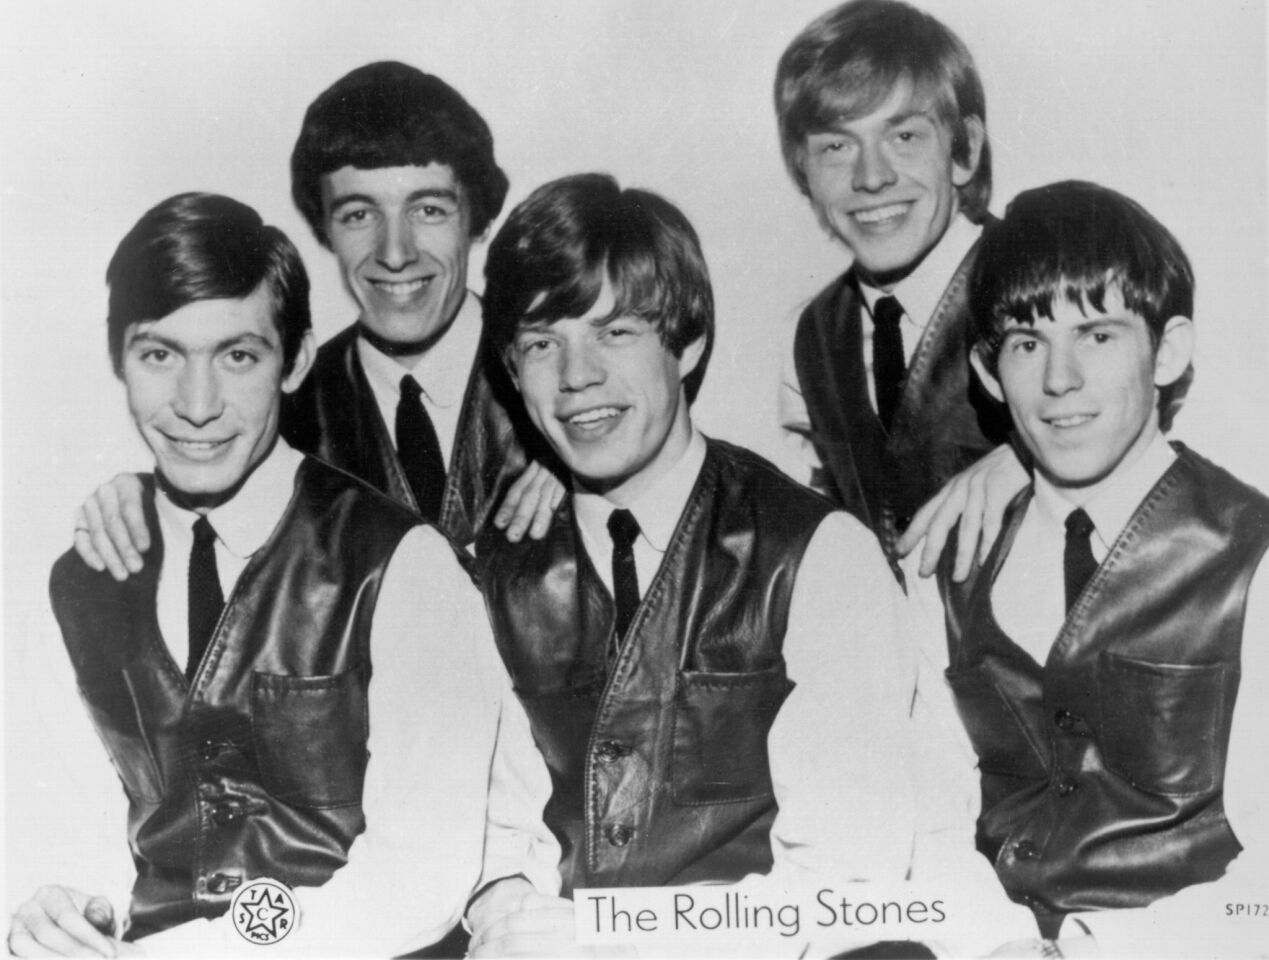 The Rolling Stones in 1962 in London. Charlie Watts, left, Bill Wyman, Mick Jagger, Brian Jones and Keith Richards.